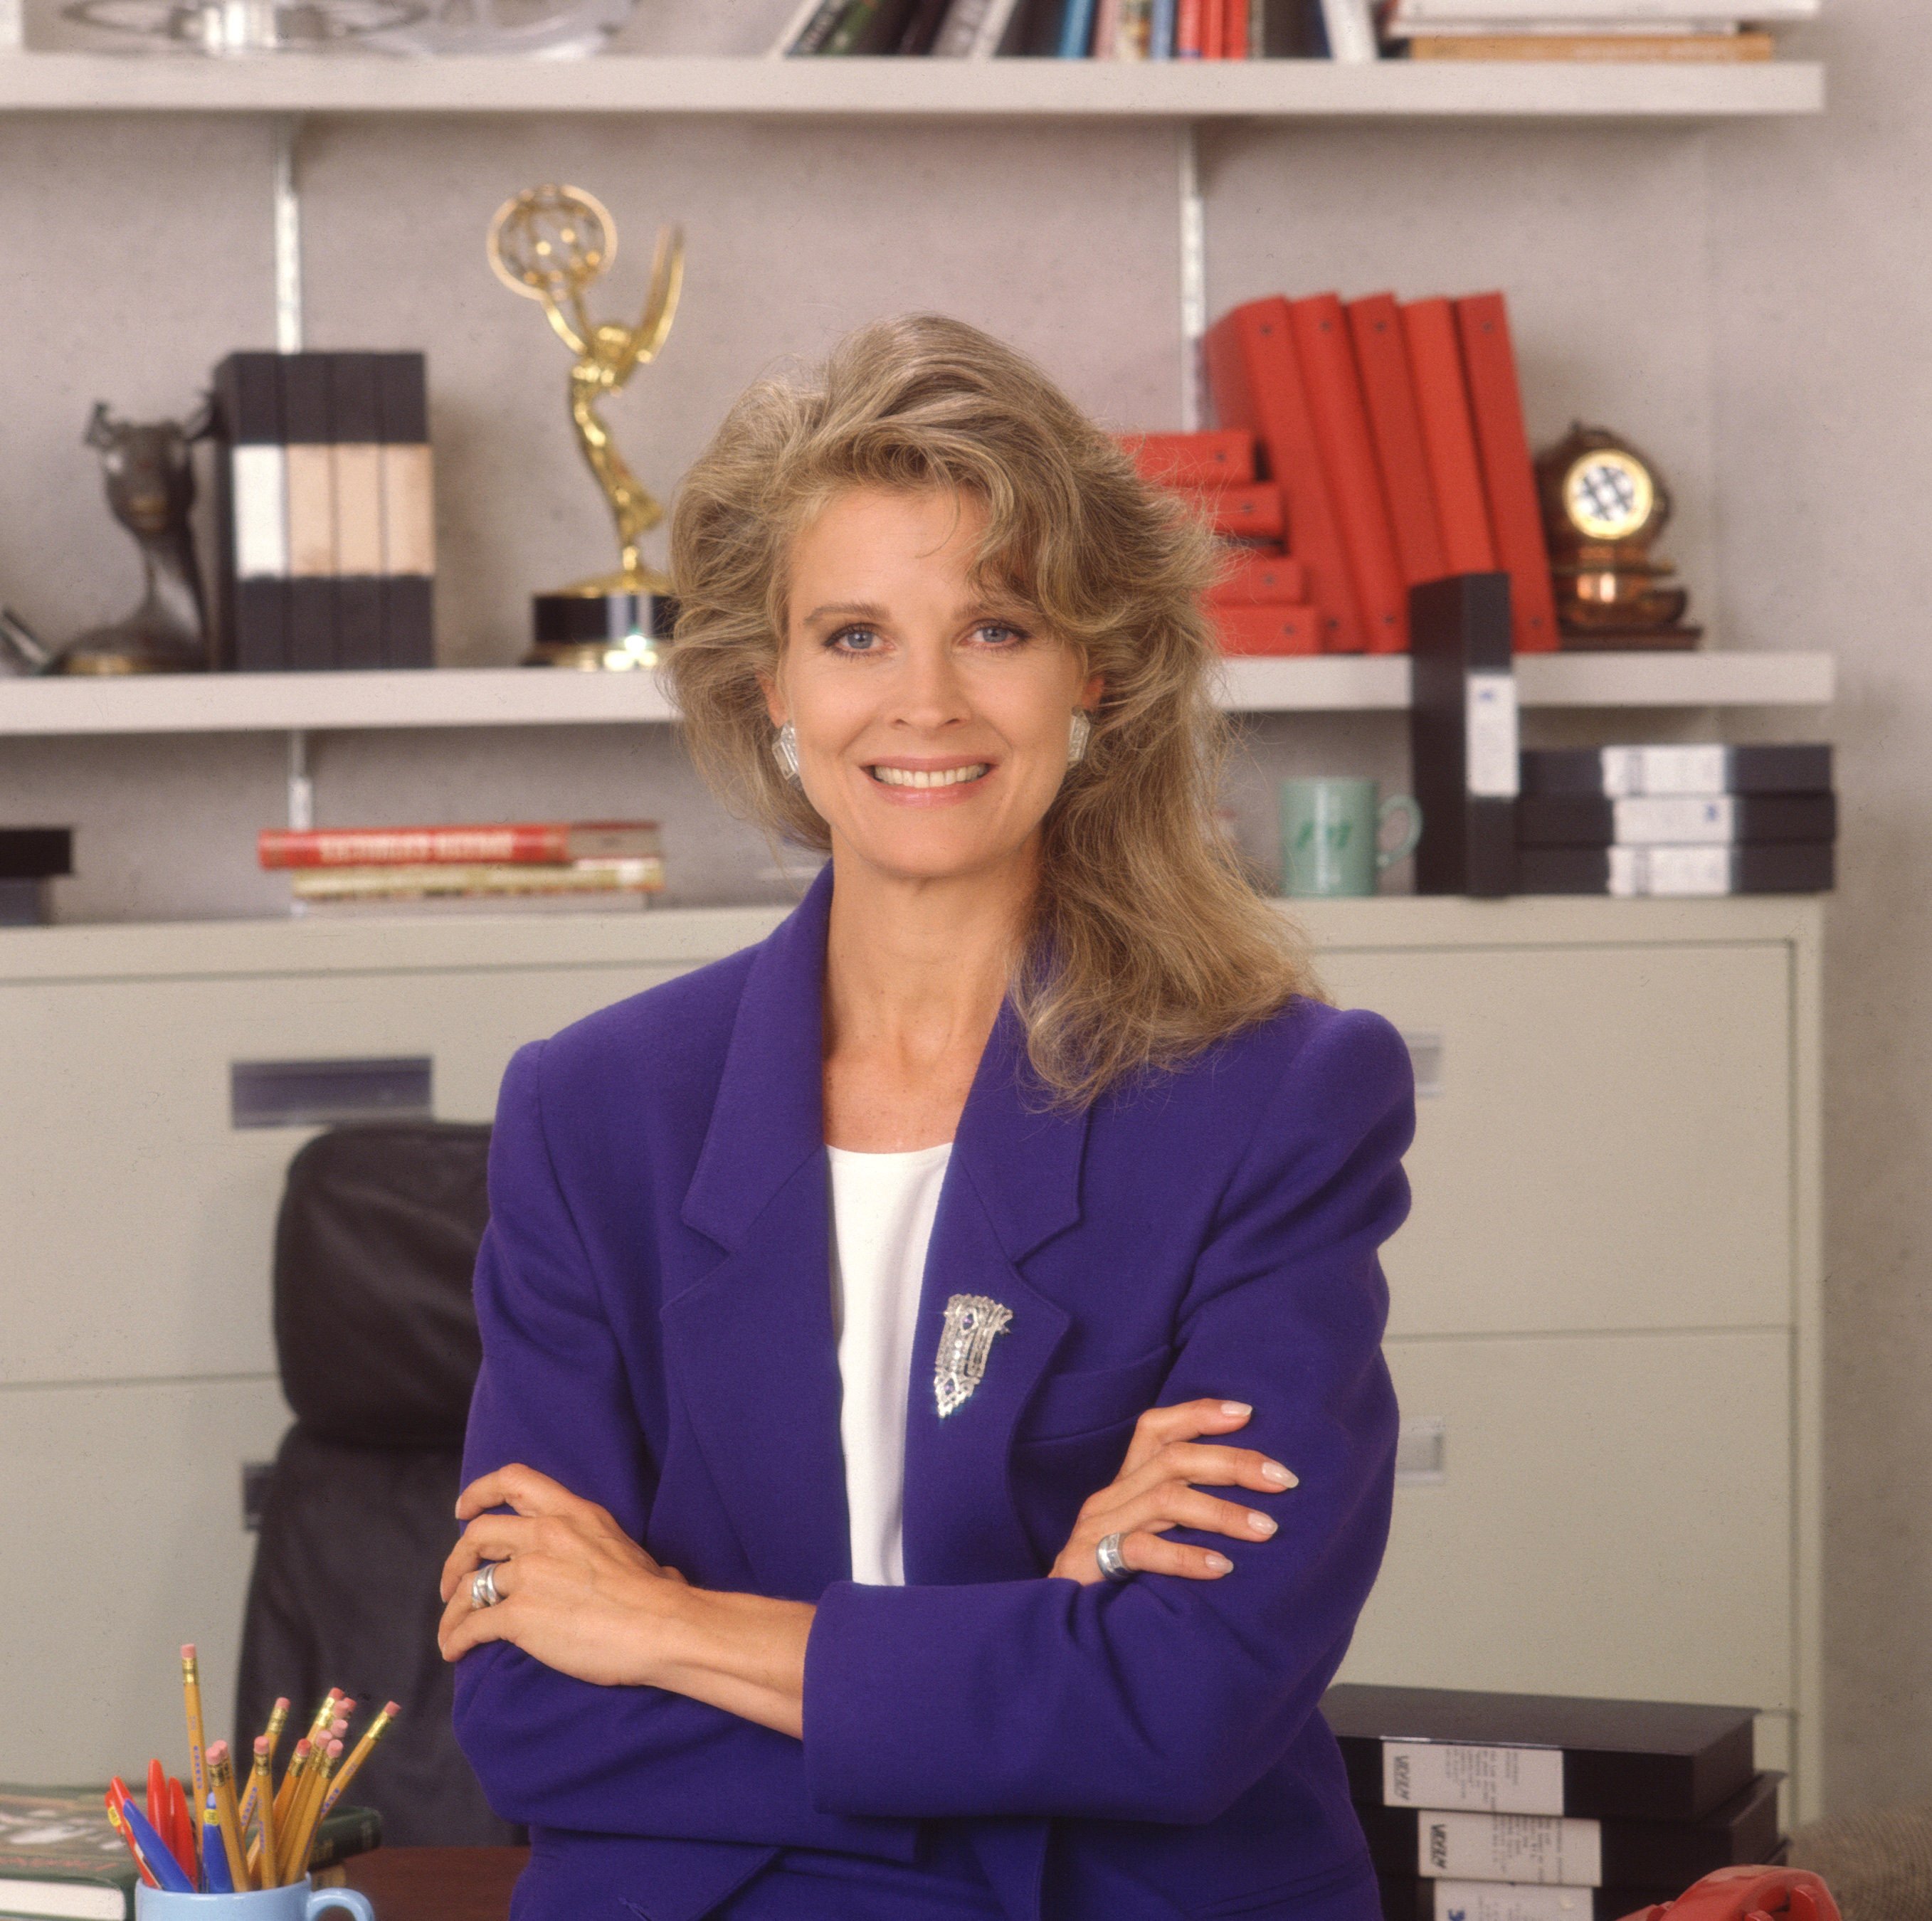 Candice Bergen on "Murphy Brown" in 1993 | Source: Getty Images